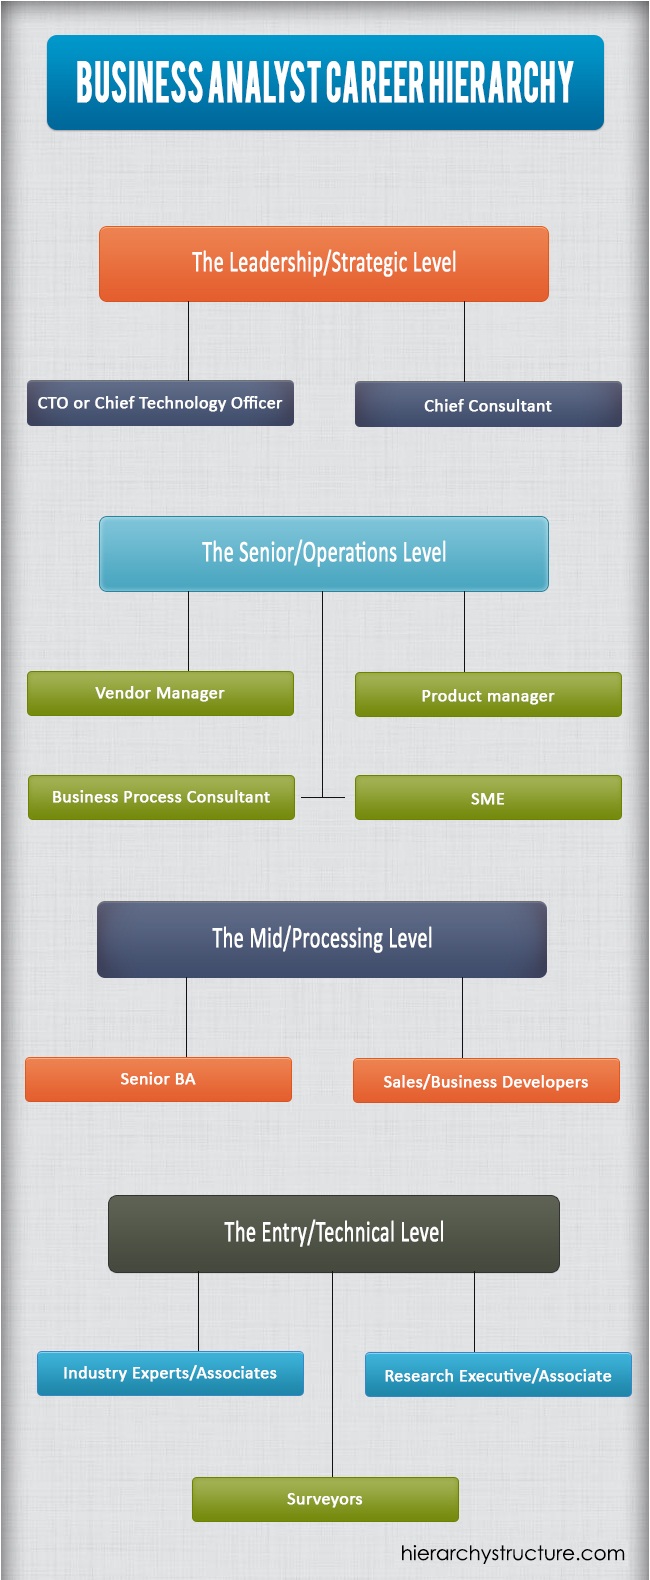 Business Analyst Career Hierarchy